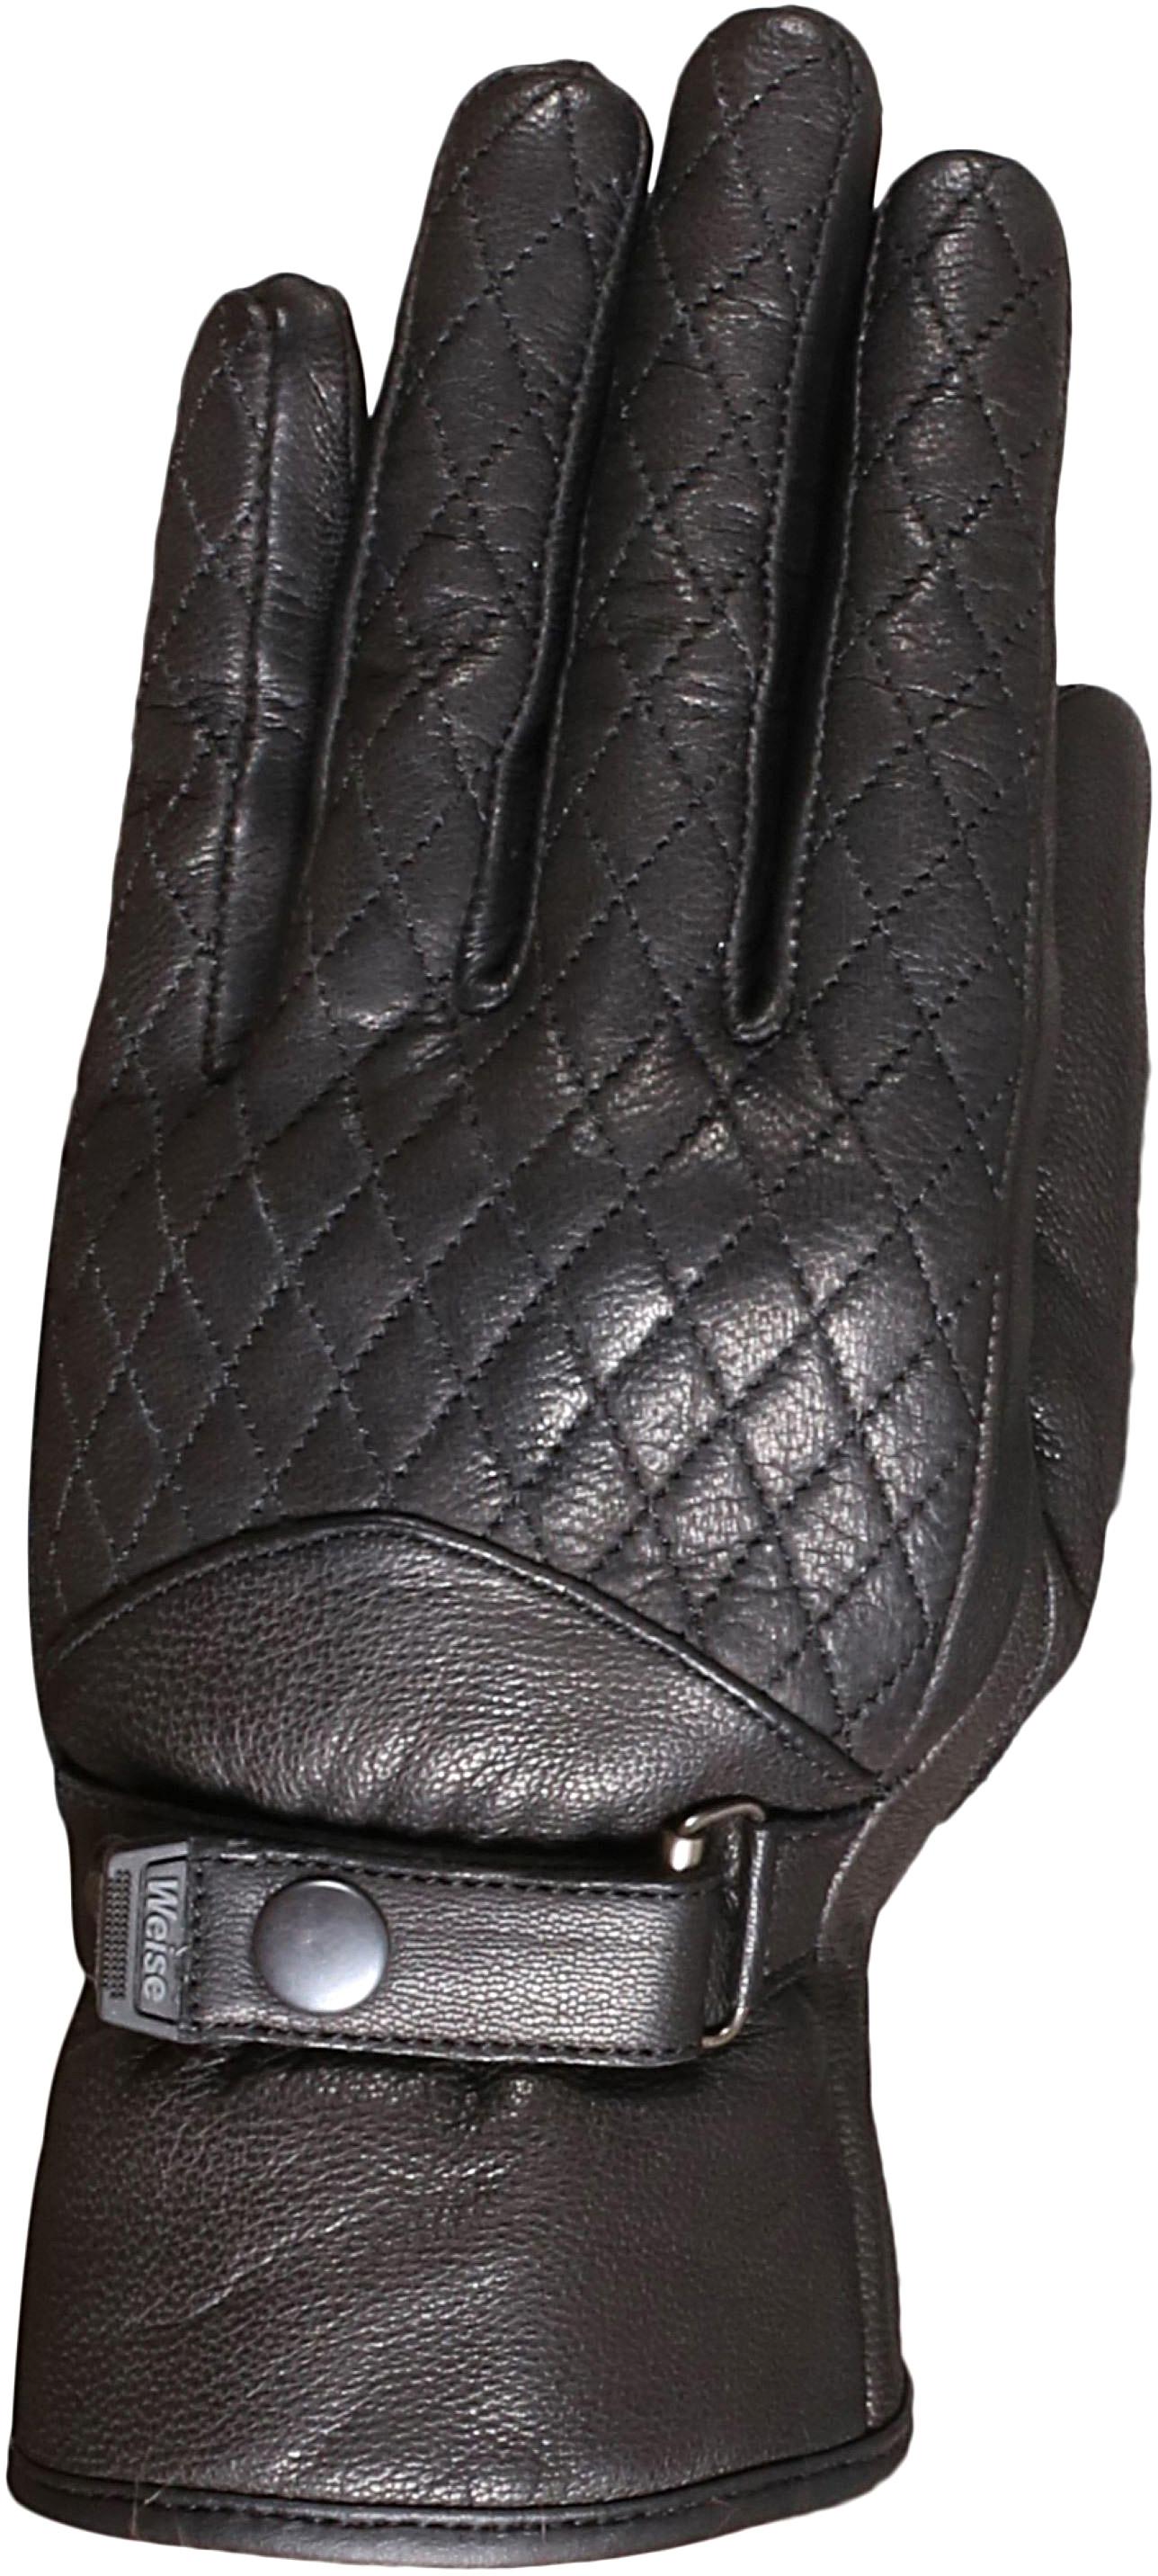 Weise Halo Womens Motorcycle Gloves - Black, S